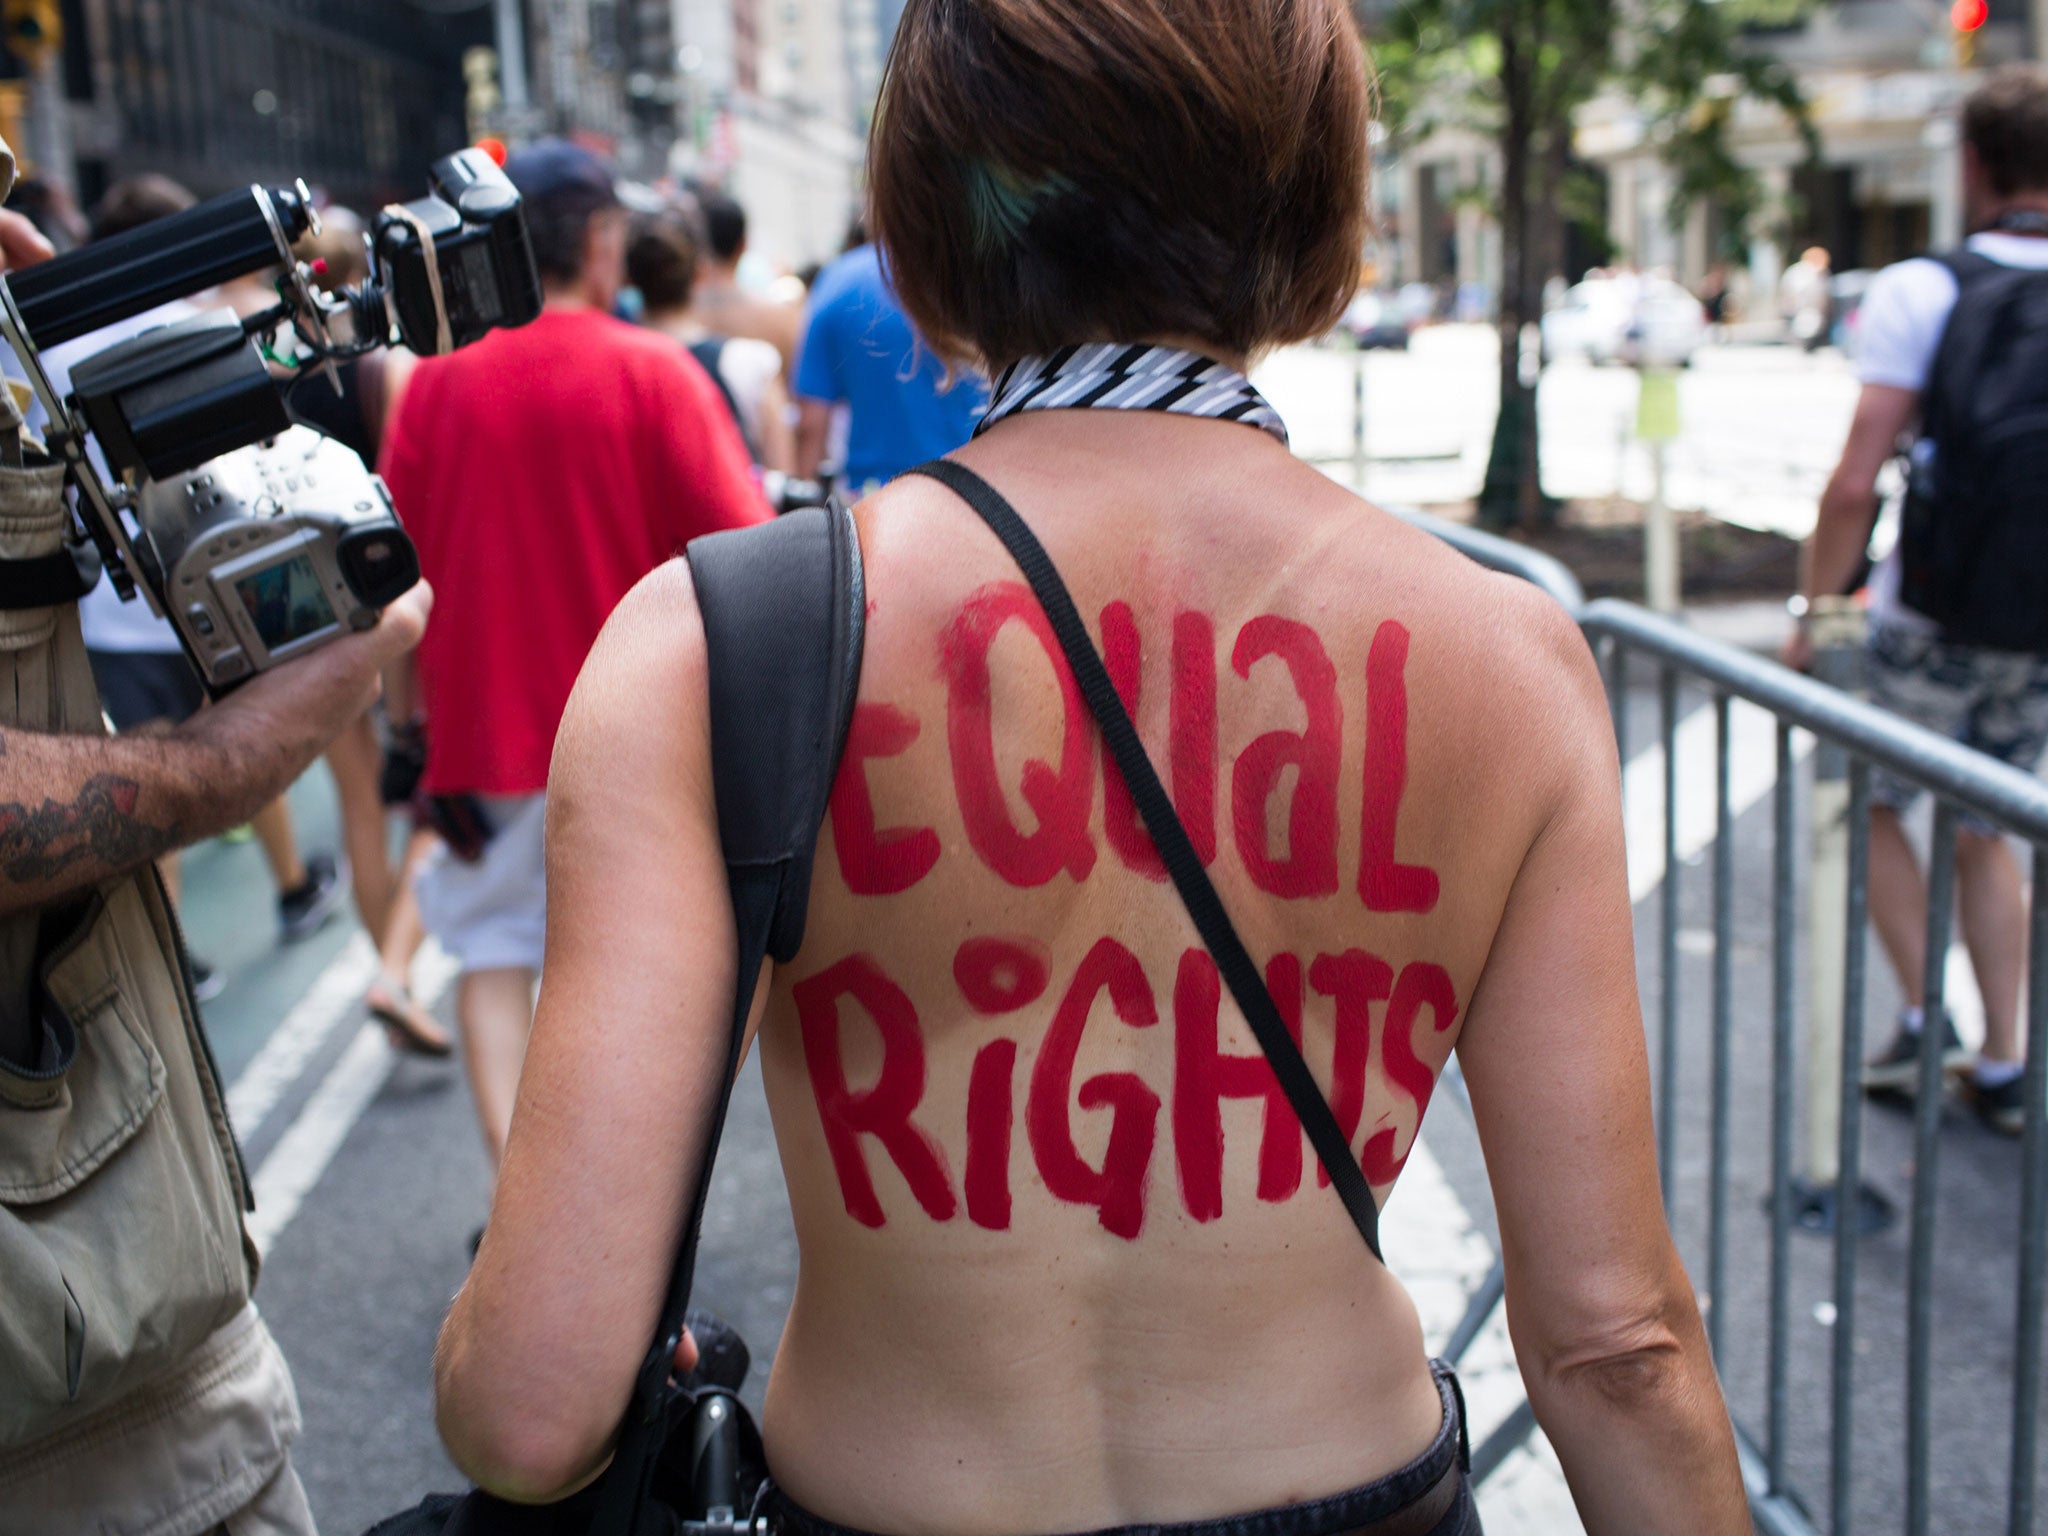 An activist marches in a protest march called the GoTopless Day Parade on Sunday, 23 August, 2015, in New York